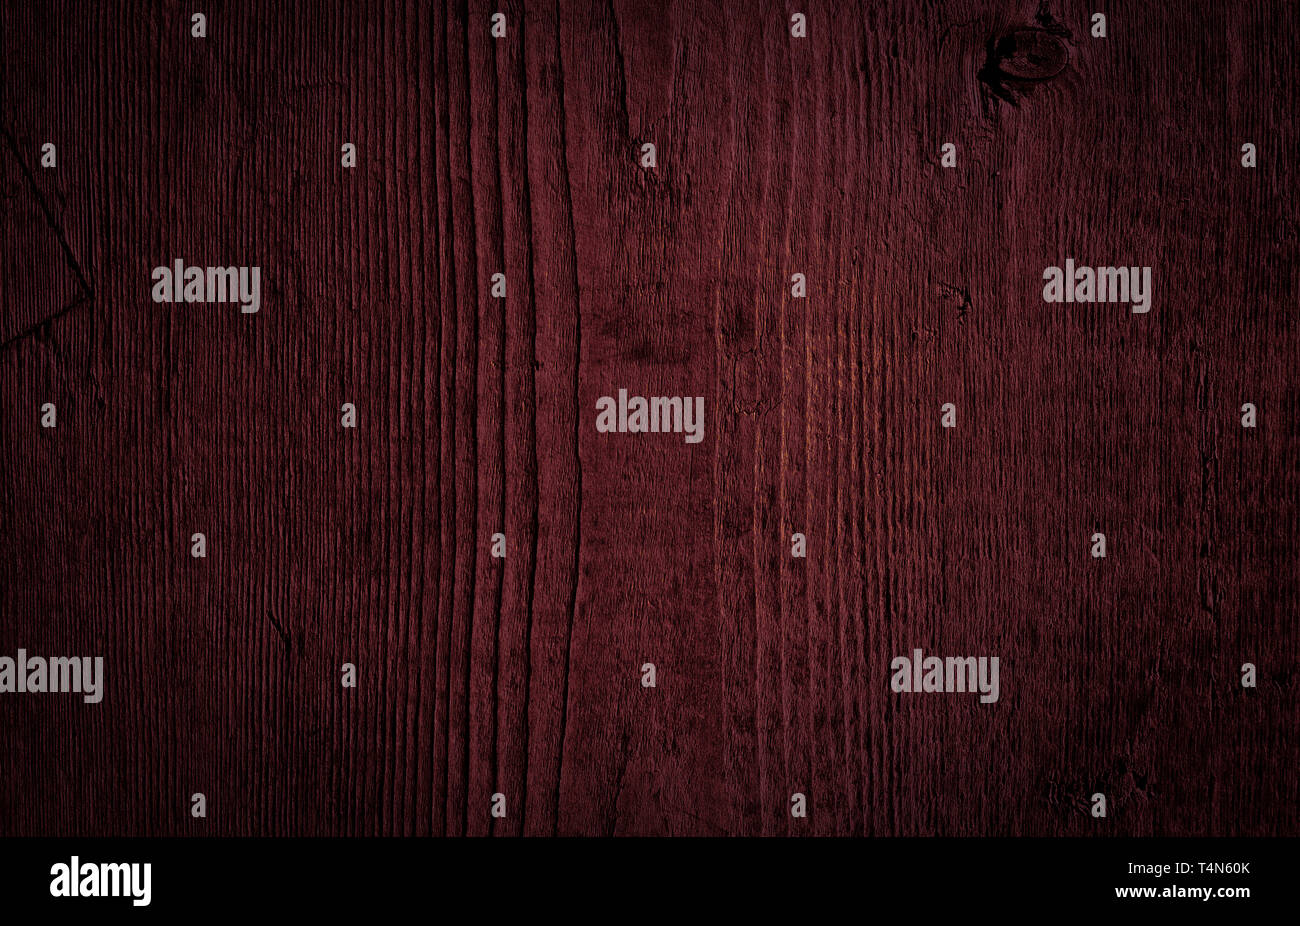 Texture of dark burgundy old rough wood. Mahogany abstract background for design. Vintage retro Stock Photo